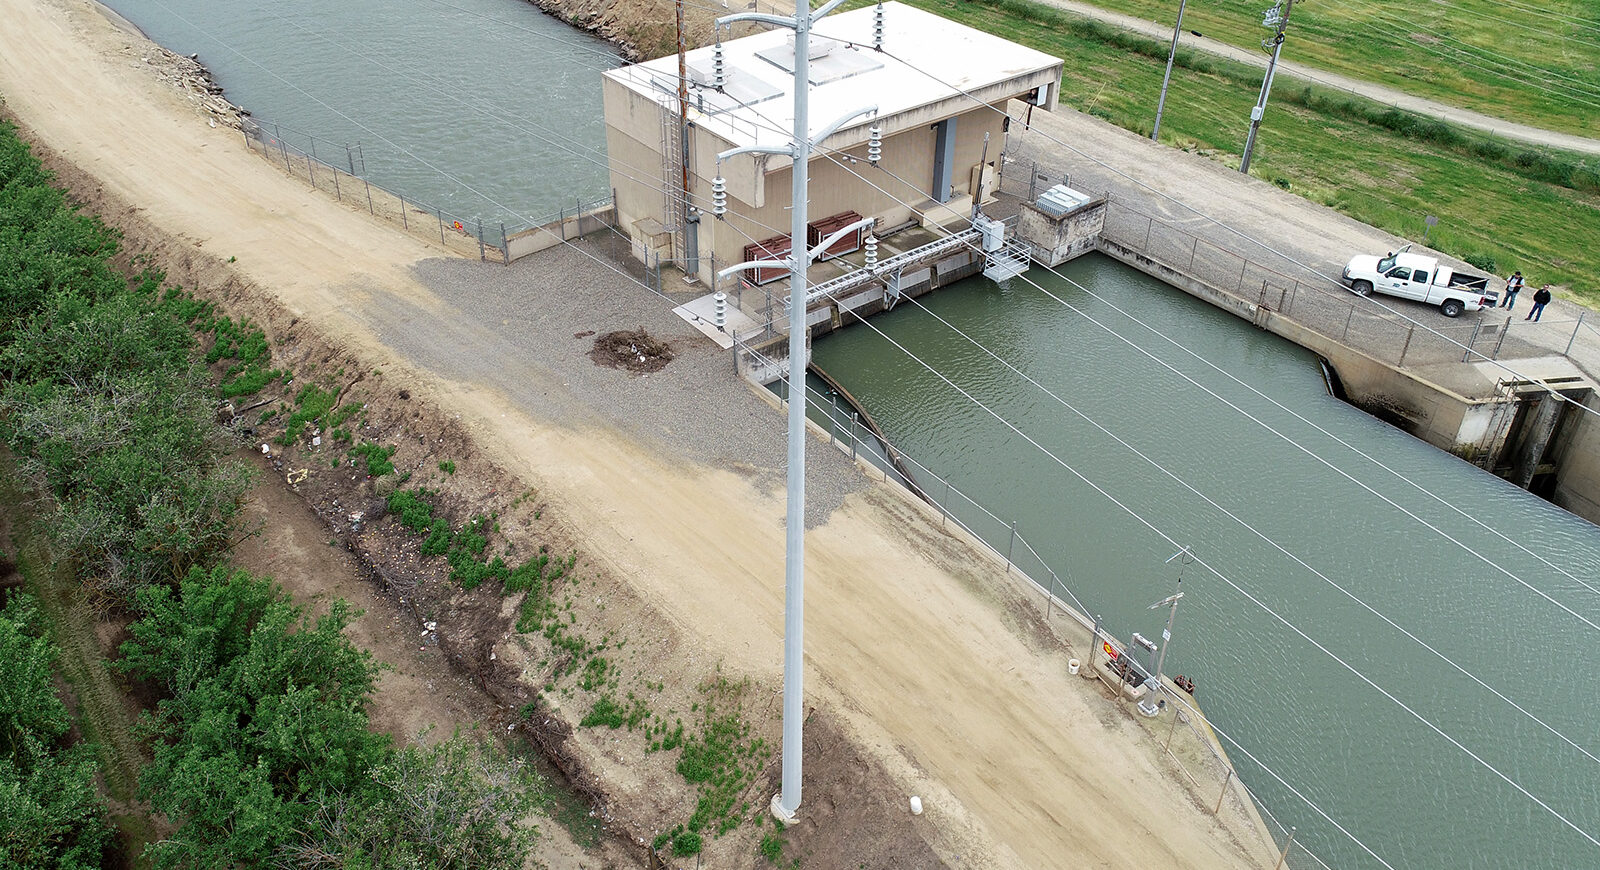 Aerial shot of small hydroelectric station over a canal